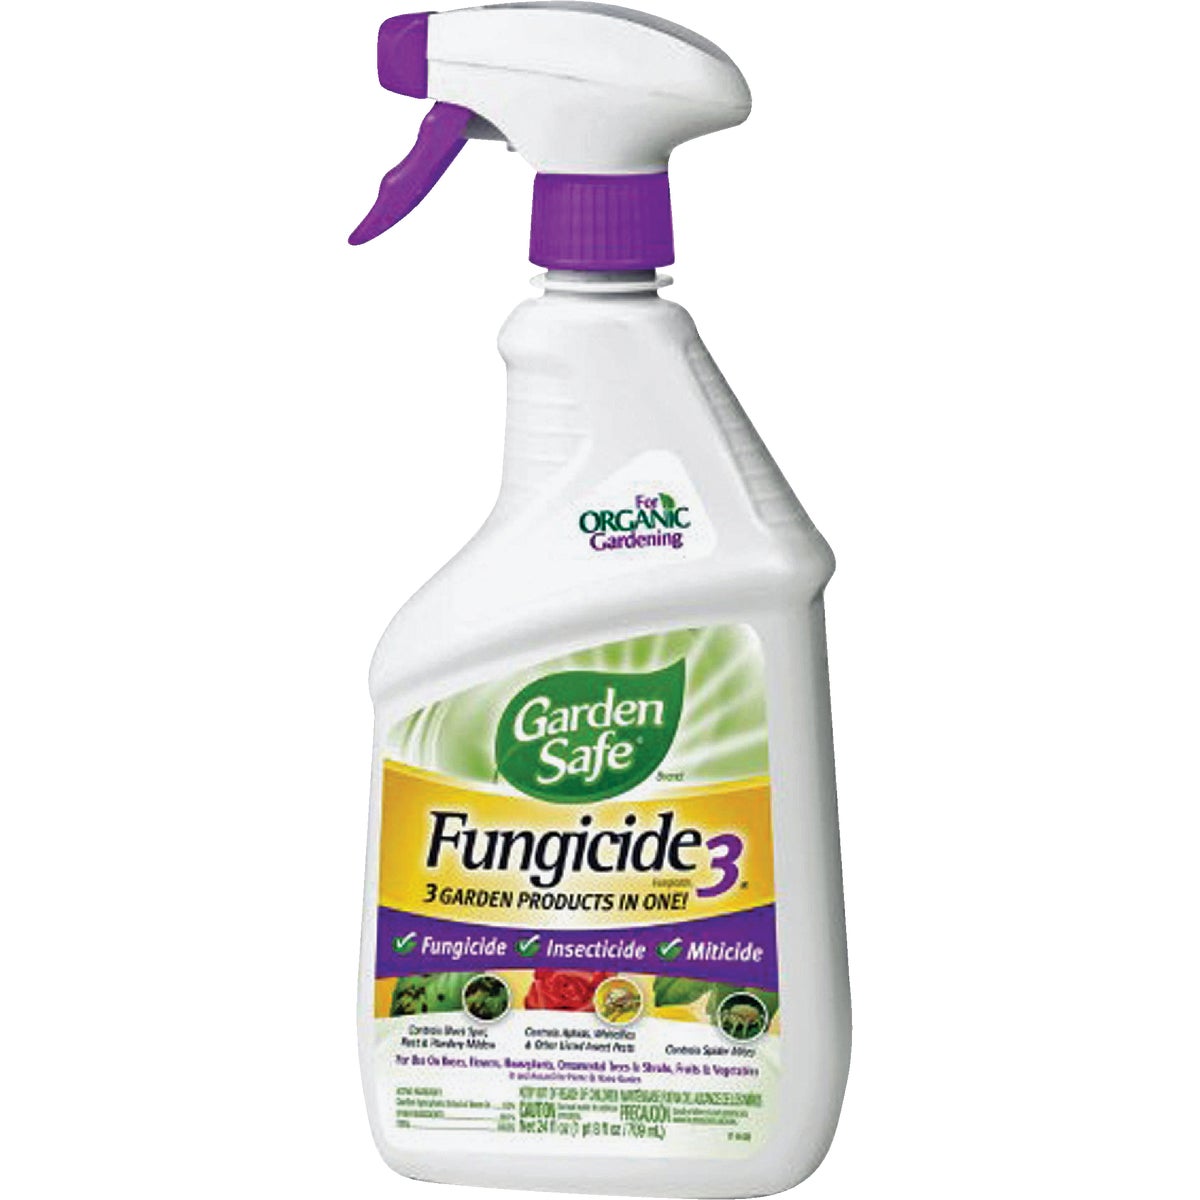 Item 702454, 3 garden products in 1: Fungicide, insecticide, and miticide.